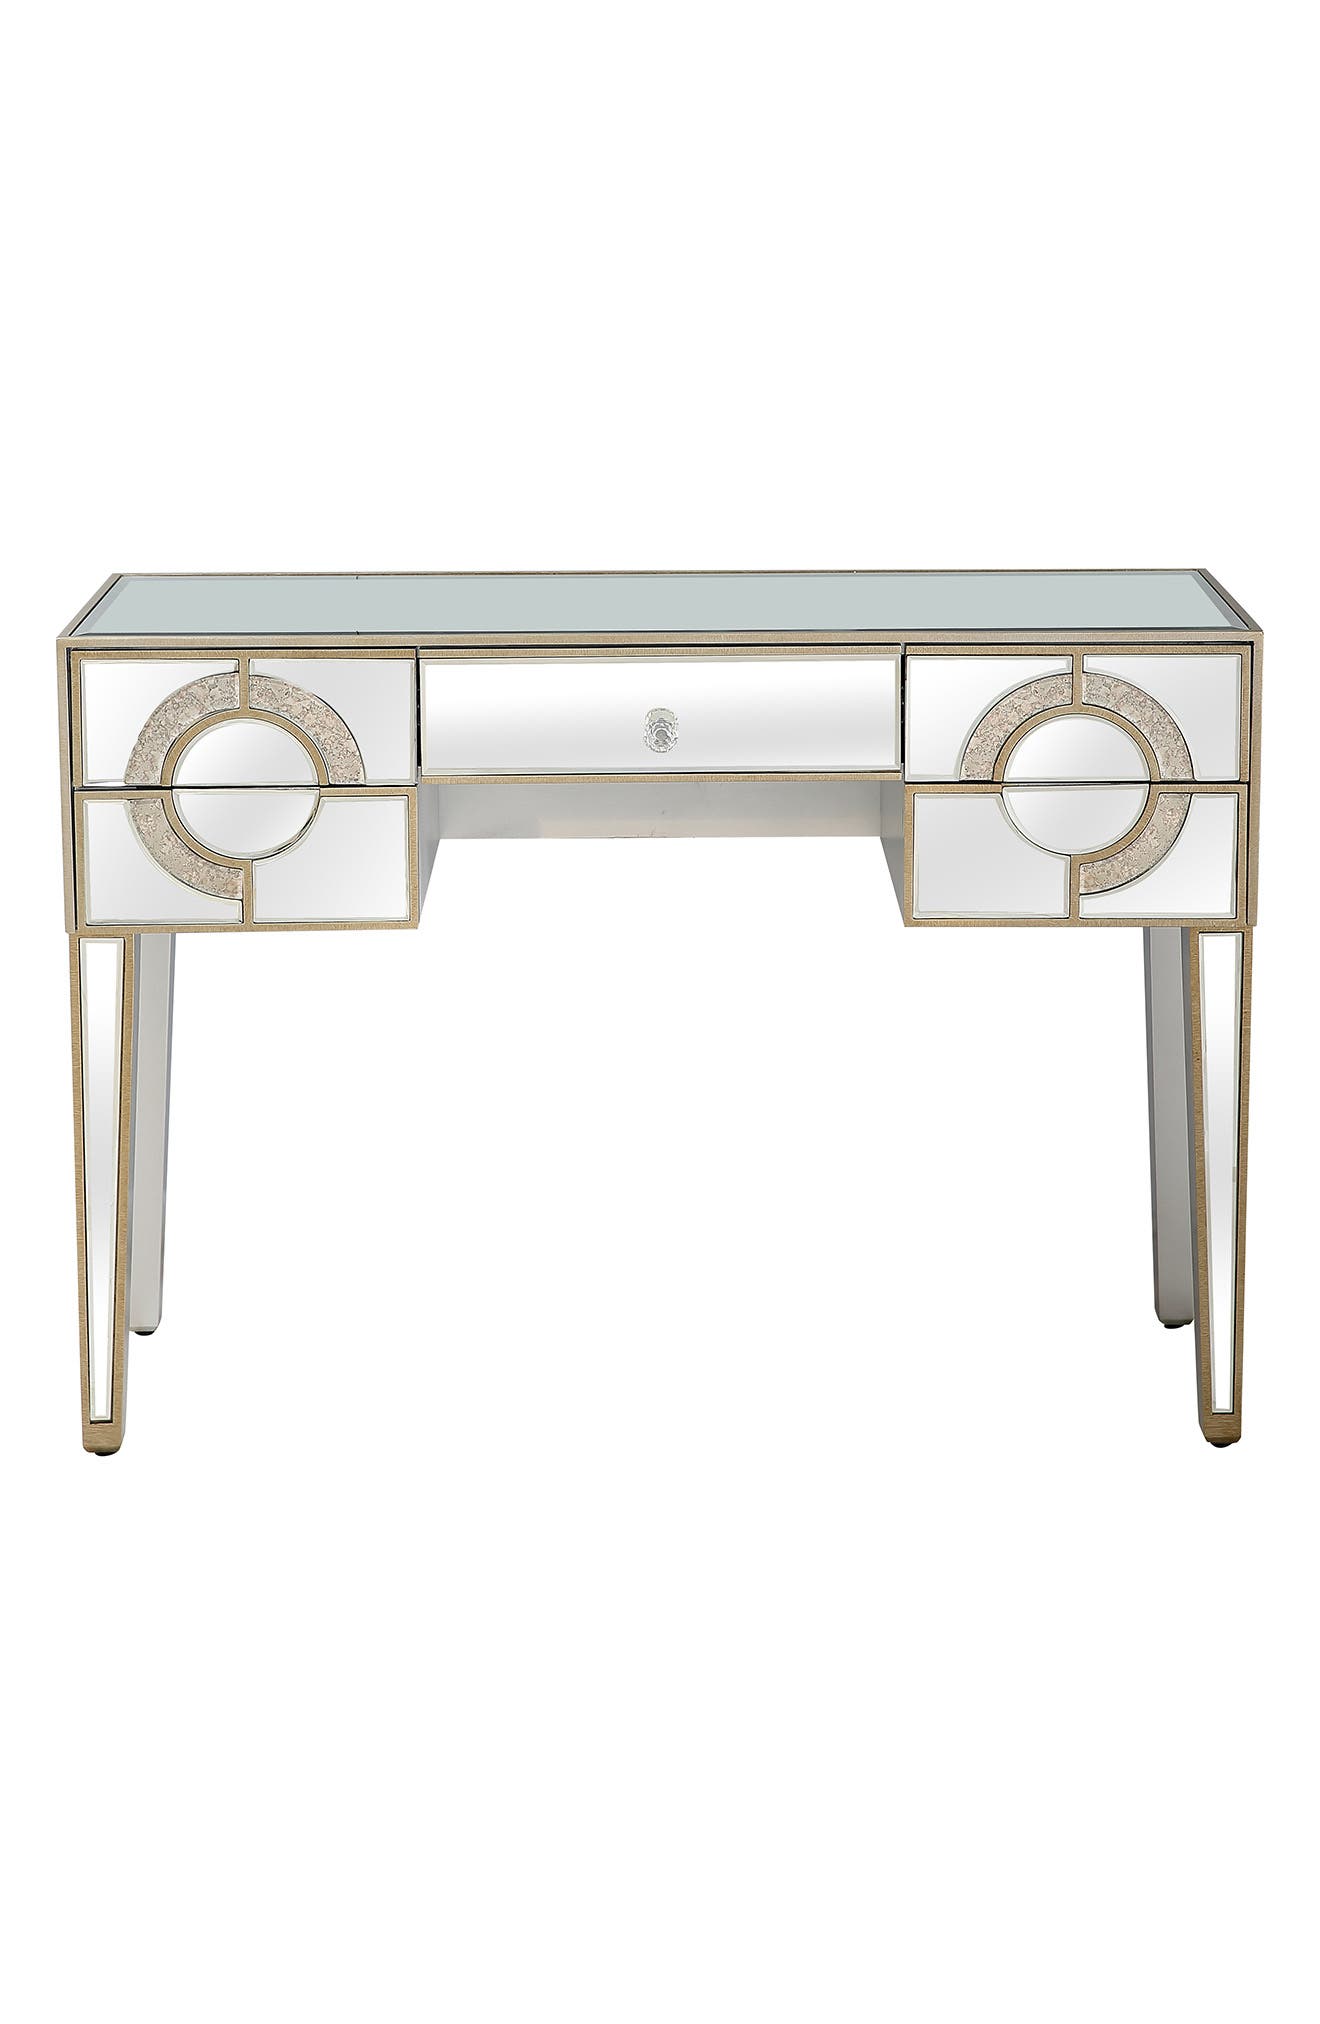 Camden Isle Ophelia Console Table In Silver